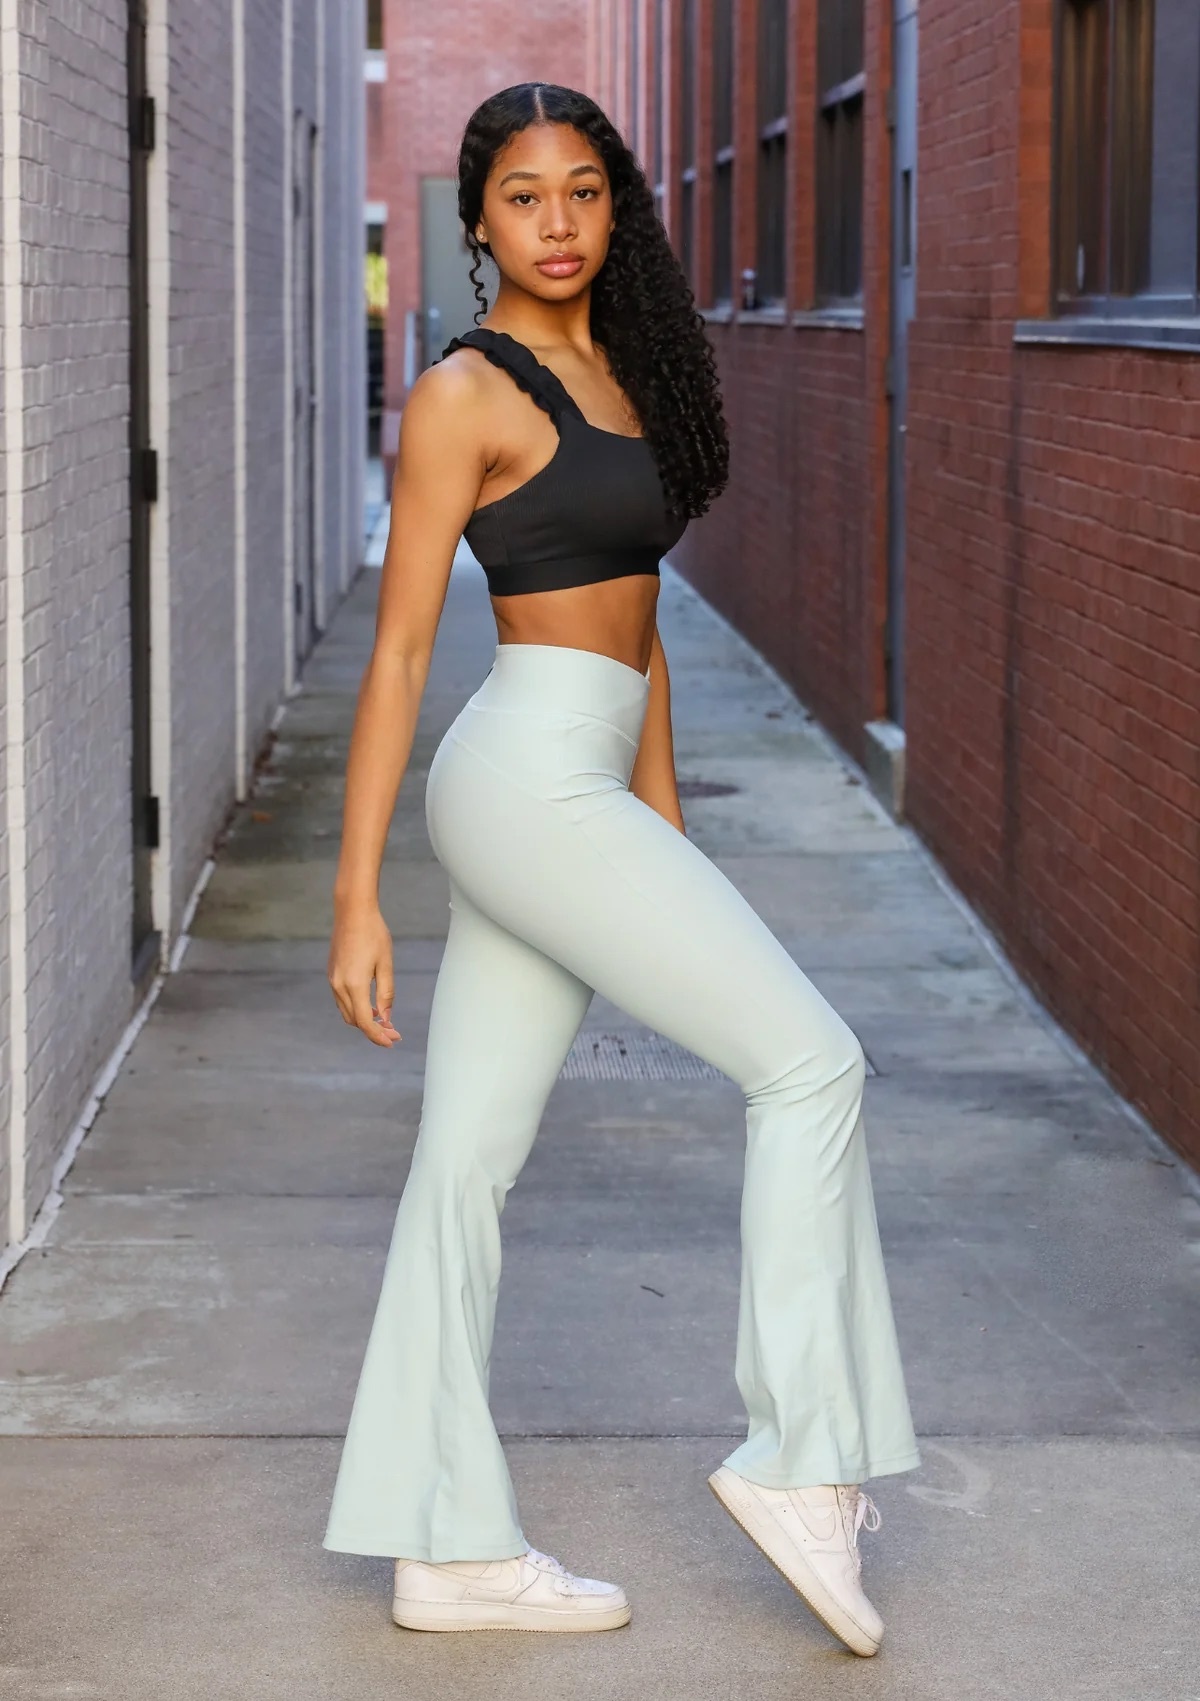 My Recent Orders Placed by Me Flare Leggings for Women Crossover